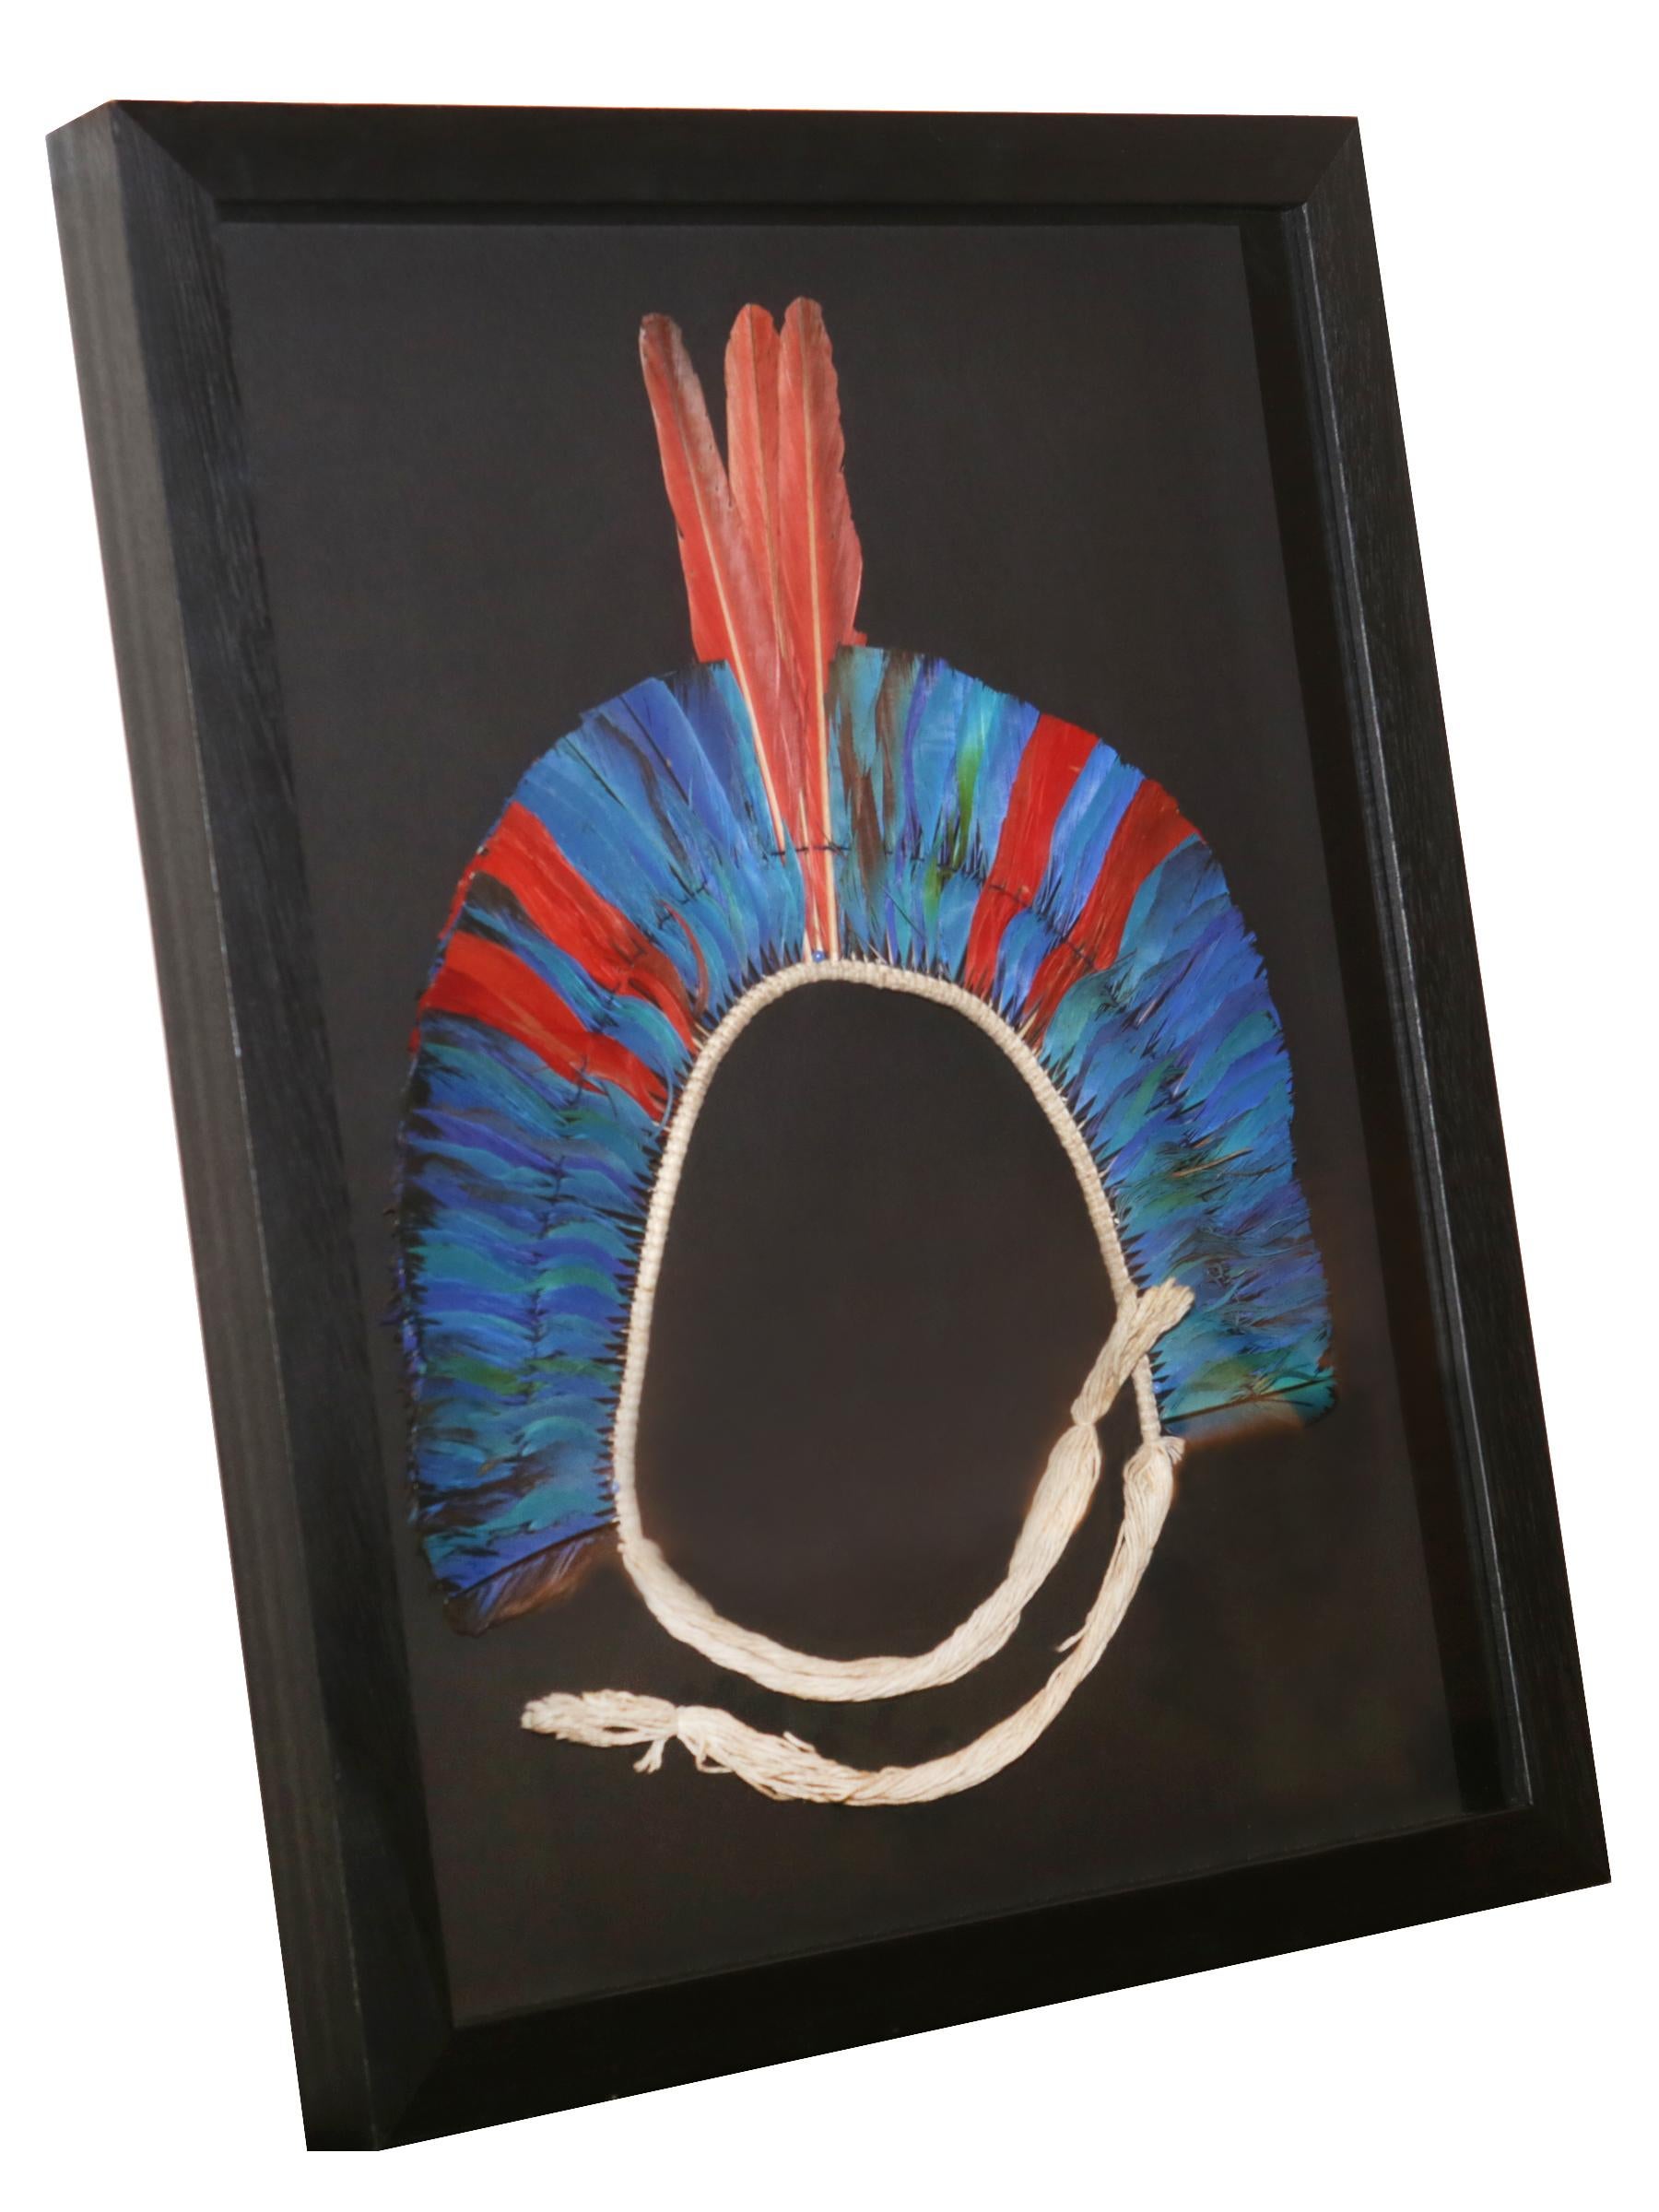 Headdress Kayapo 2 with natural feathers and
with cotton frame. Under glass with black wooden
frame. From Kayapo ethnic tribe, particularly from
Mekragnoti tribe. From Rio Chiche, southeast Para
state in Brazil. Pieces collected by Sir André